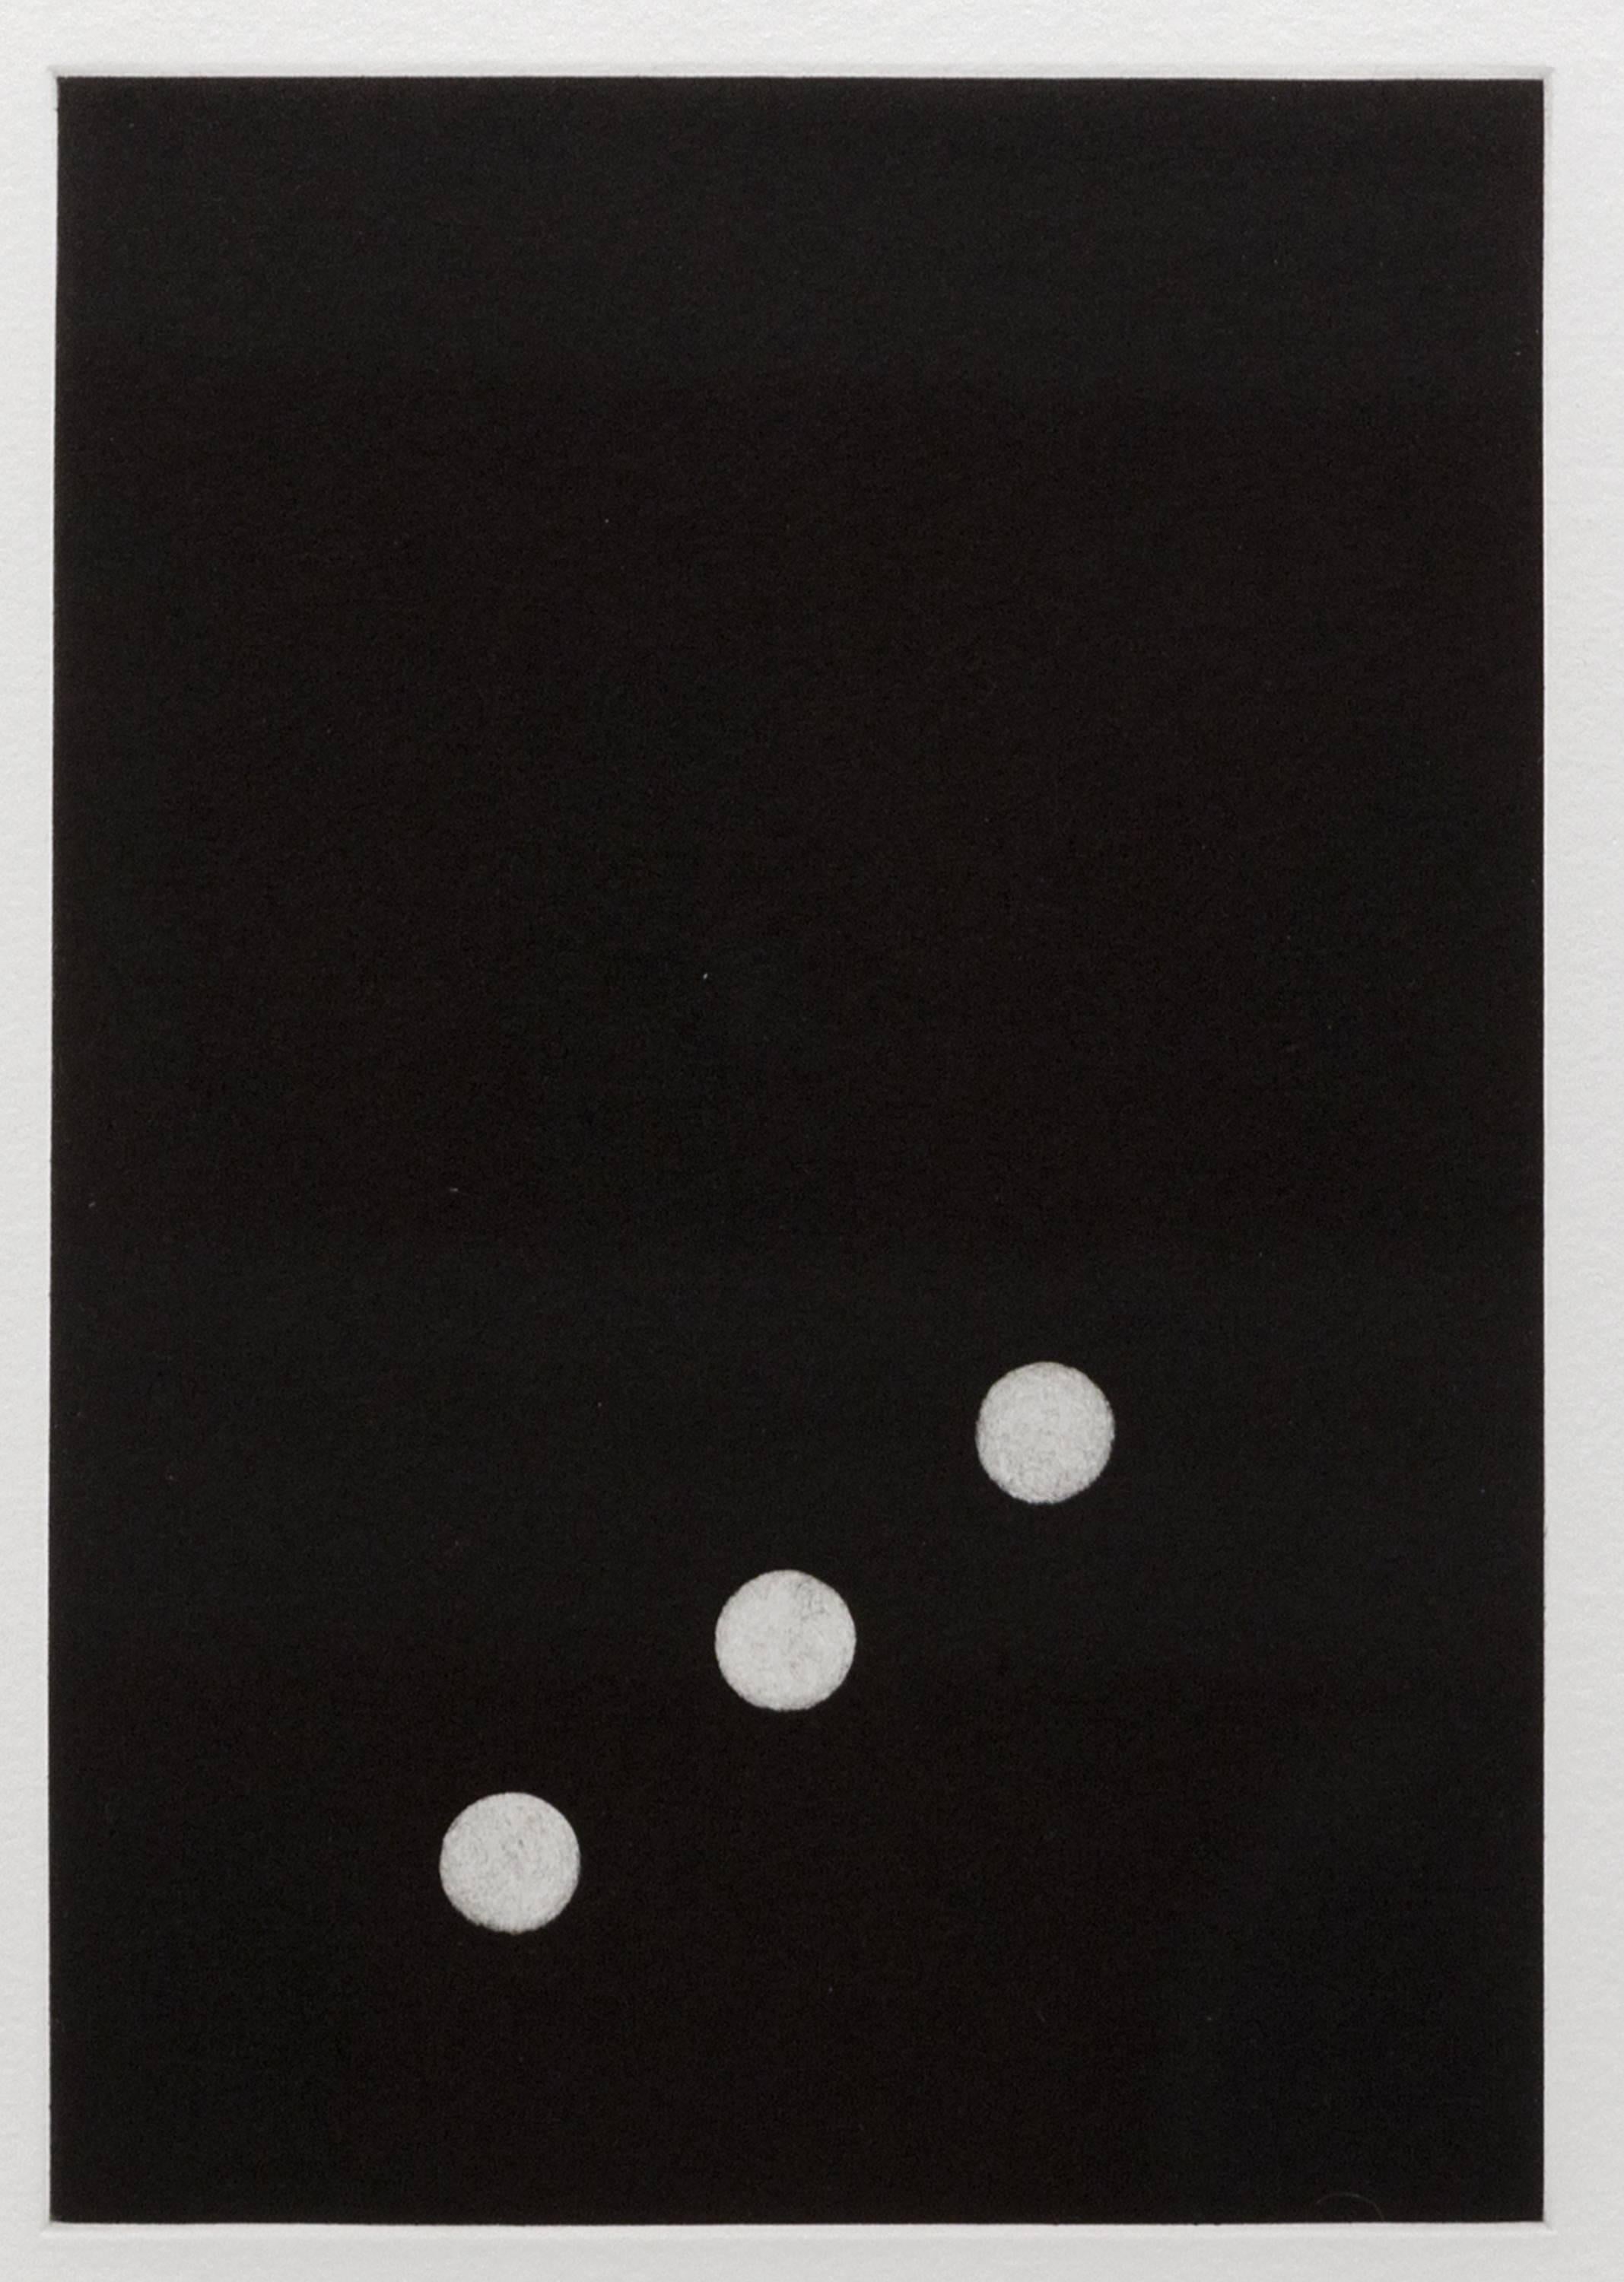 An etching and aquatint depicting a black domino tile with three white dots by Post War artist Donald Sultan. Signed left side, Illegible. Edition lower right, 